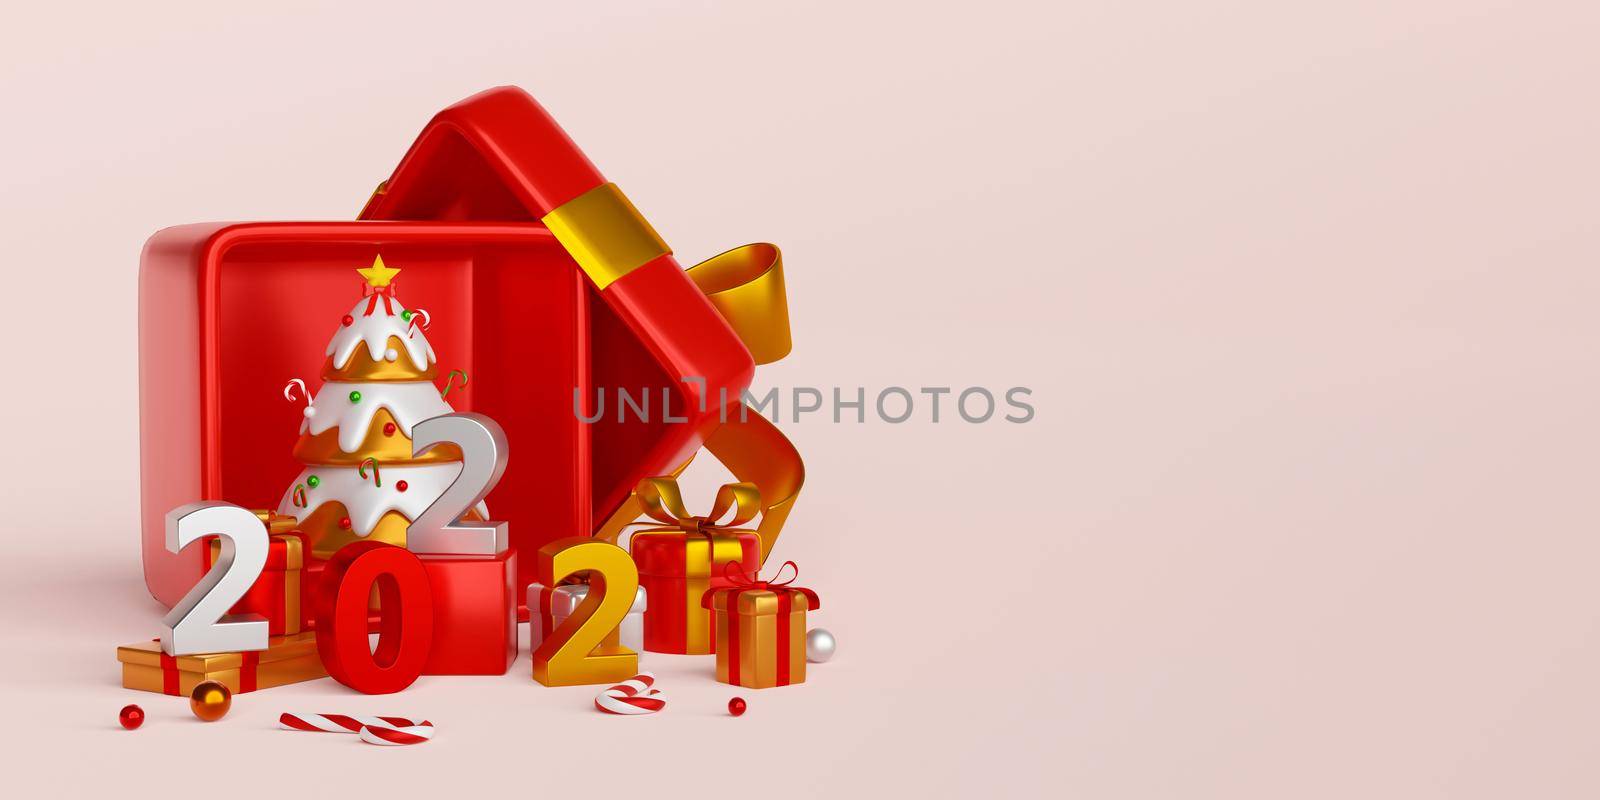 Merry Christmas and Happy New Year, Christmas tree in gift box with Christmas ornament, 3d illustration by nutzchotwarut